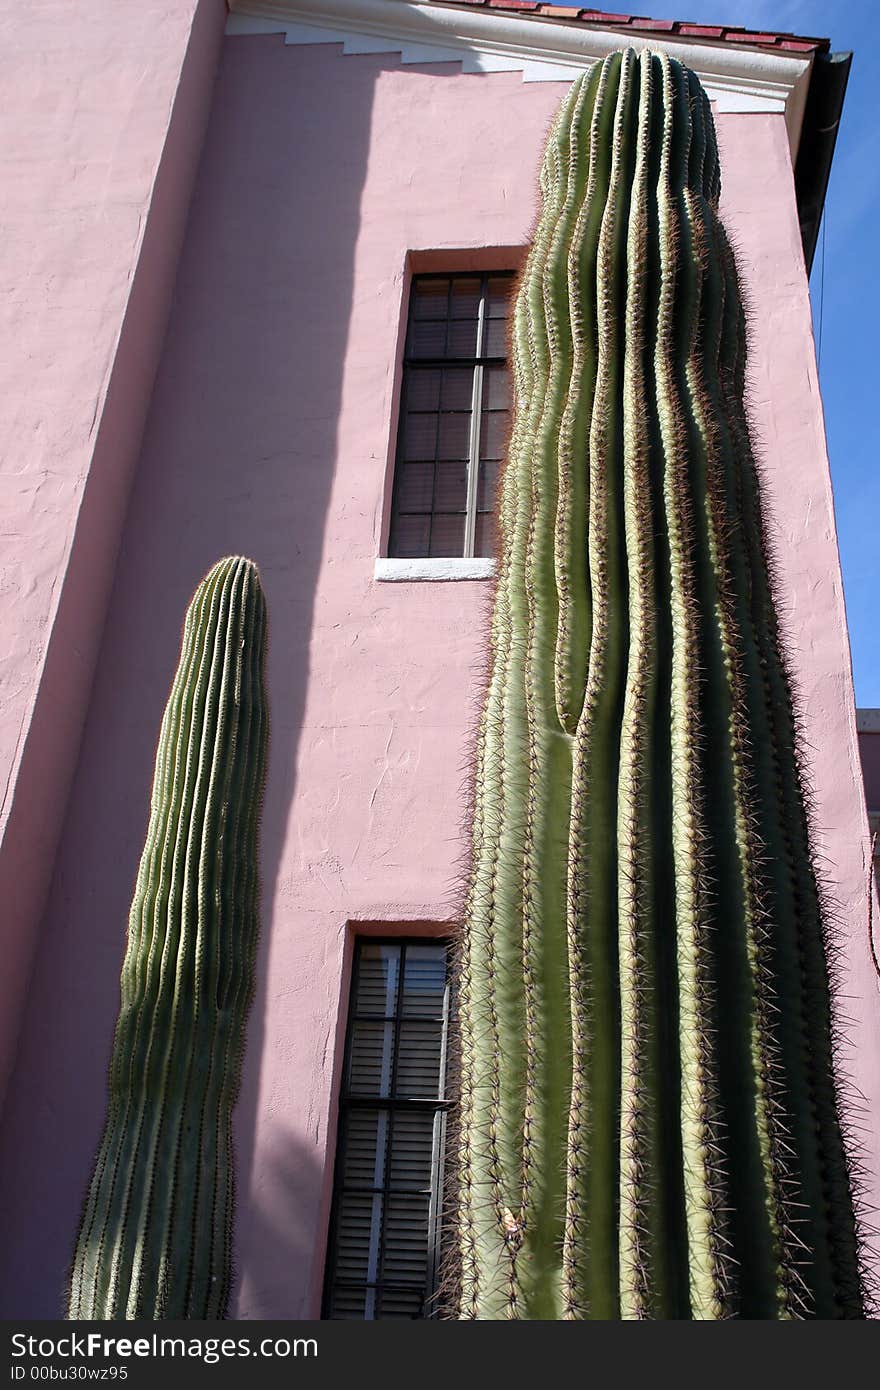 Two tall cacti show off their height when they stand tall above a second story window.